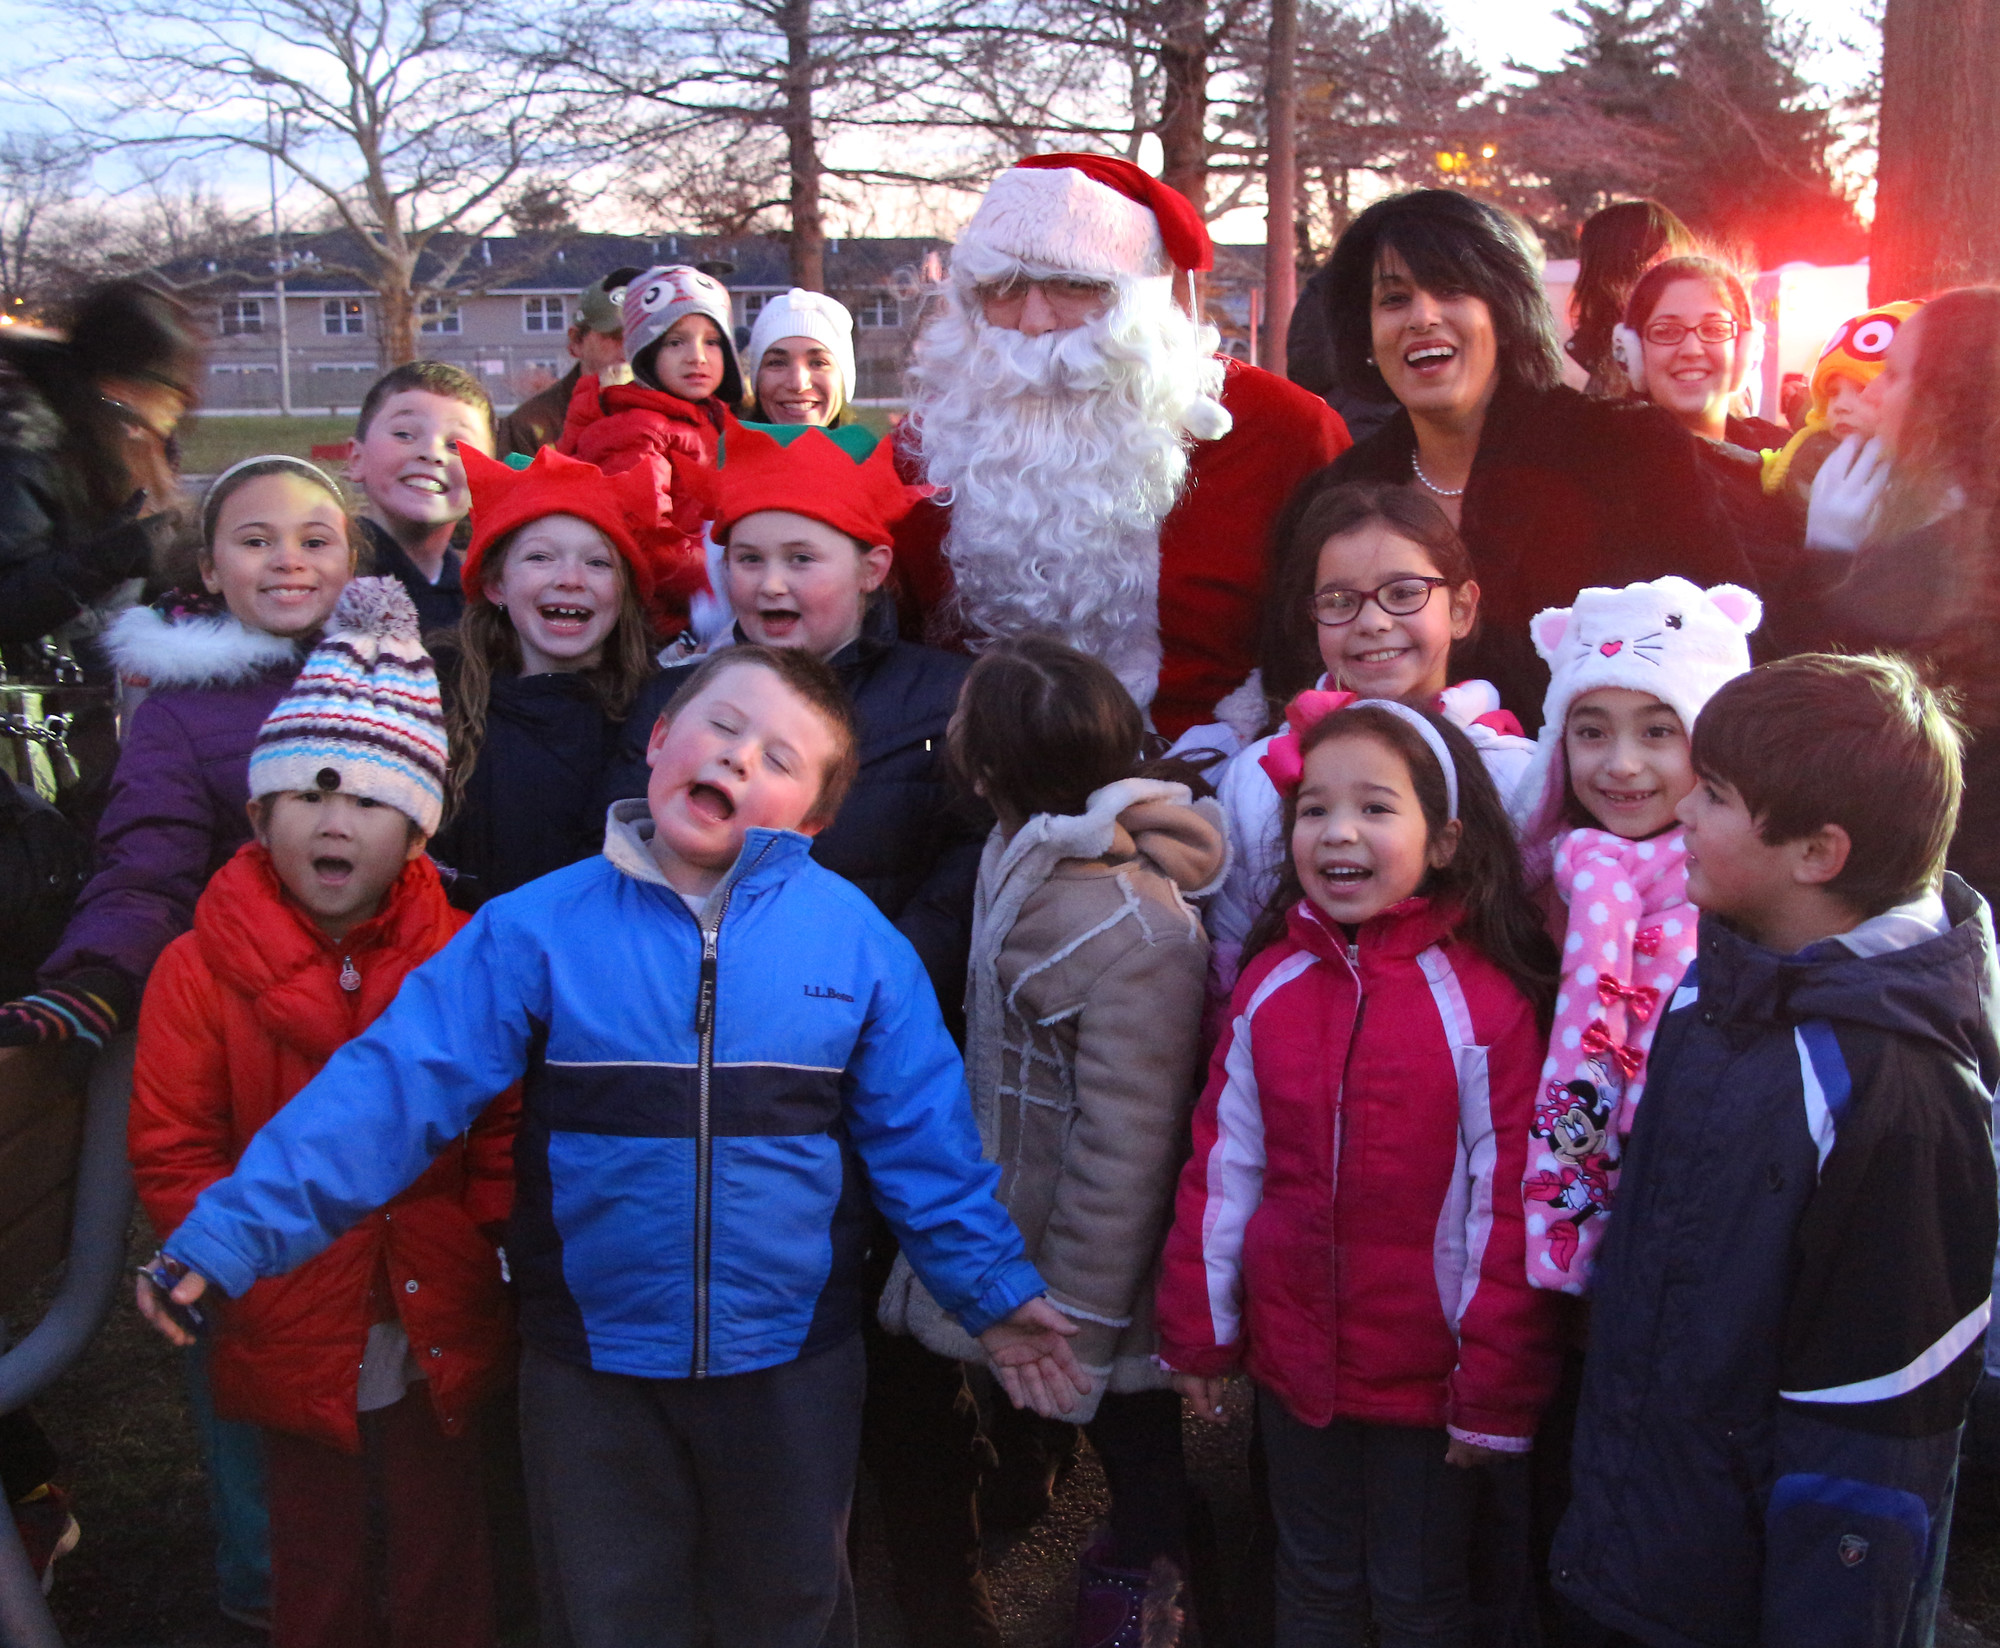 The arrival of Santa brought smiles to many kids’ faces.